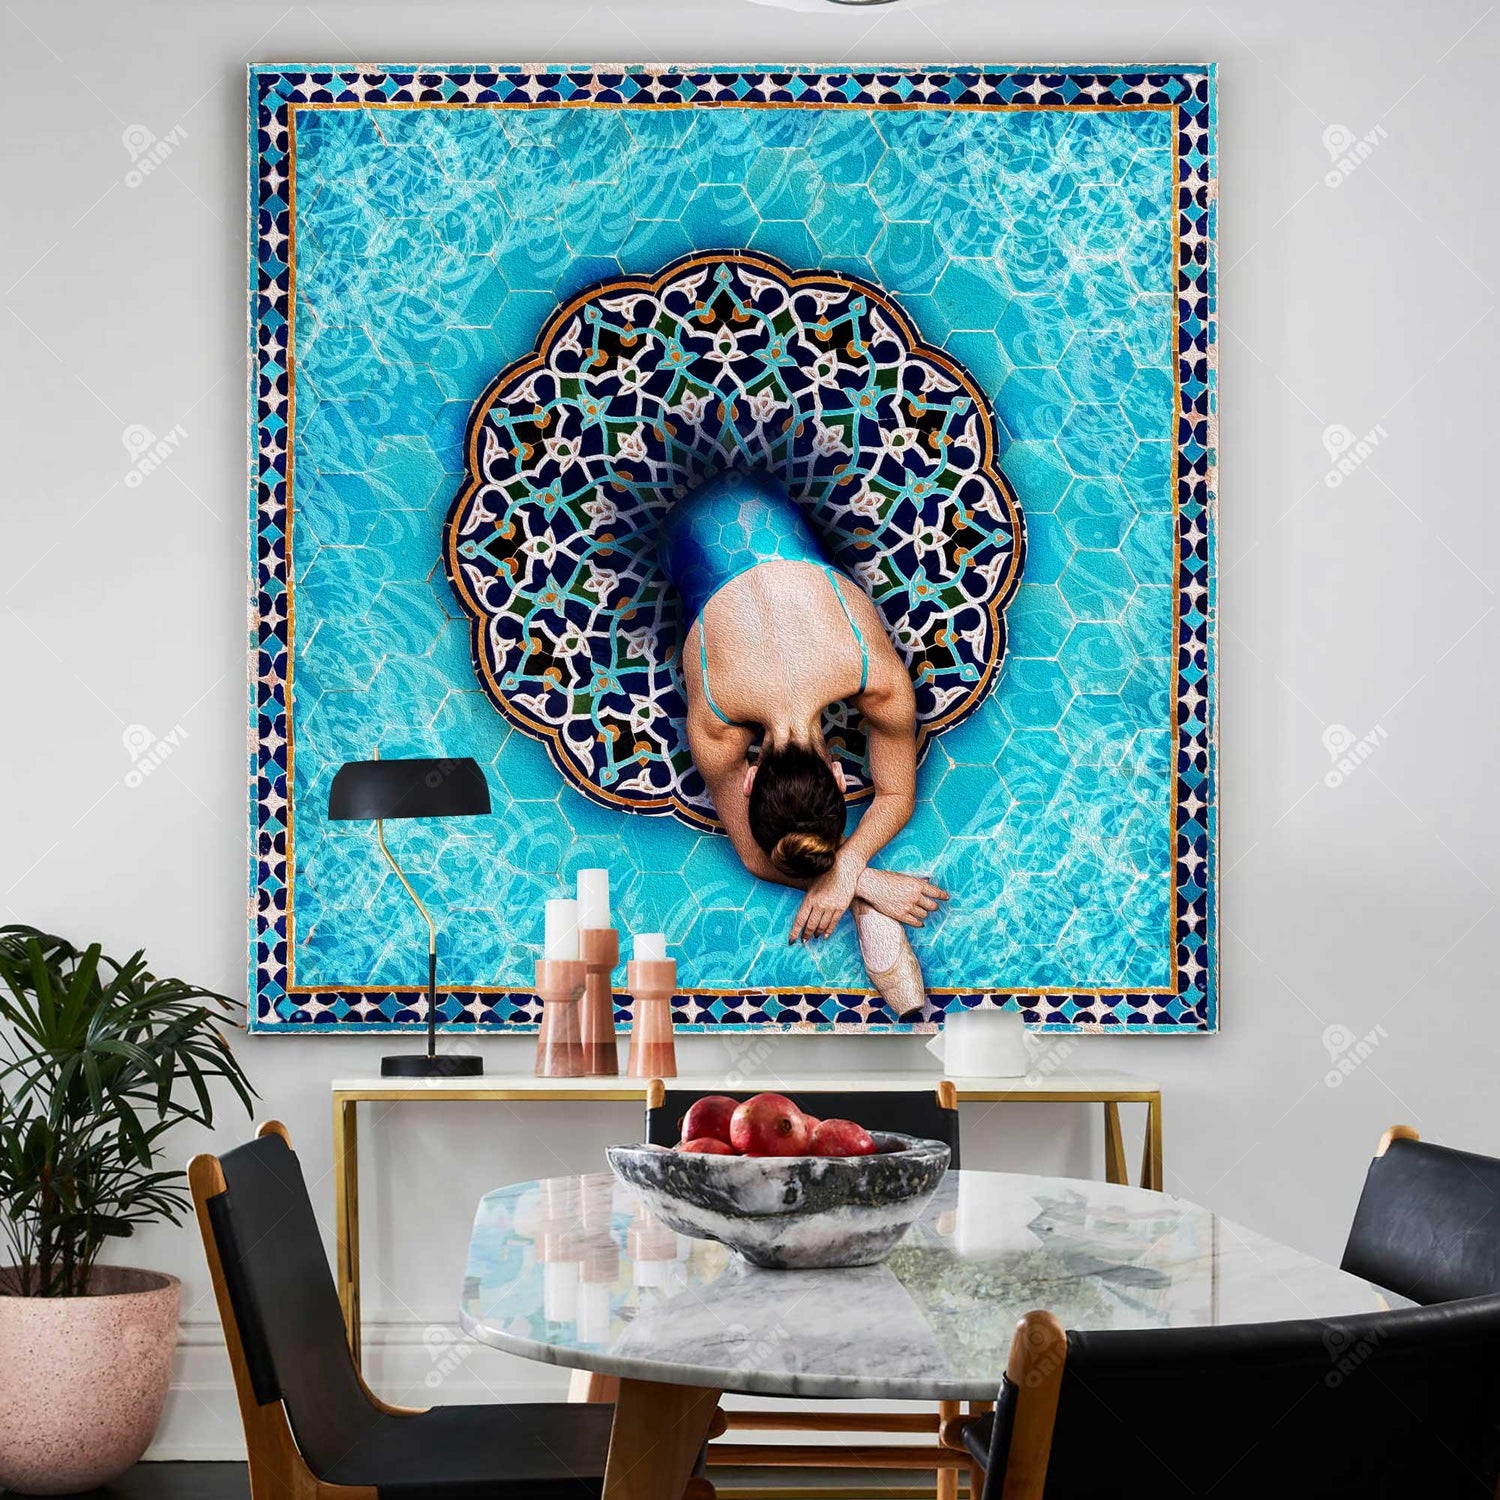 The Voice of Love and Ballet | Persian Wall Art | Persian Home Wall Decor - ORIAVI Persian Art, persian artwork for sale, persian calligraphy, persian calligraphy wall art, persian mix media wall art, persian painting, persian wall art